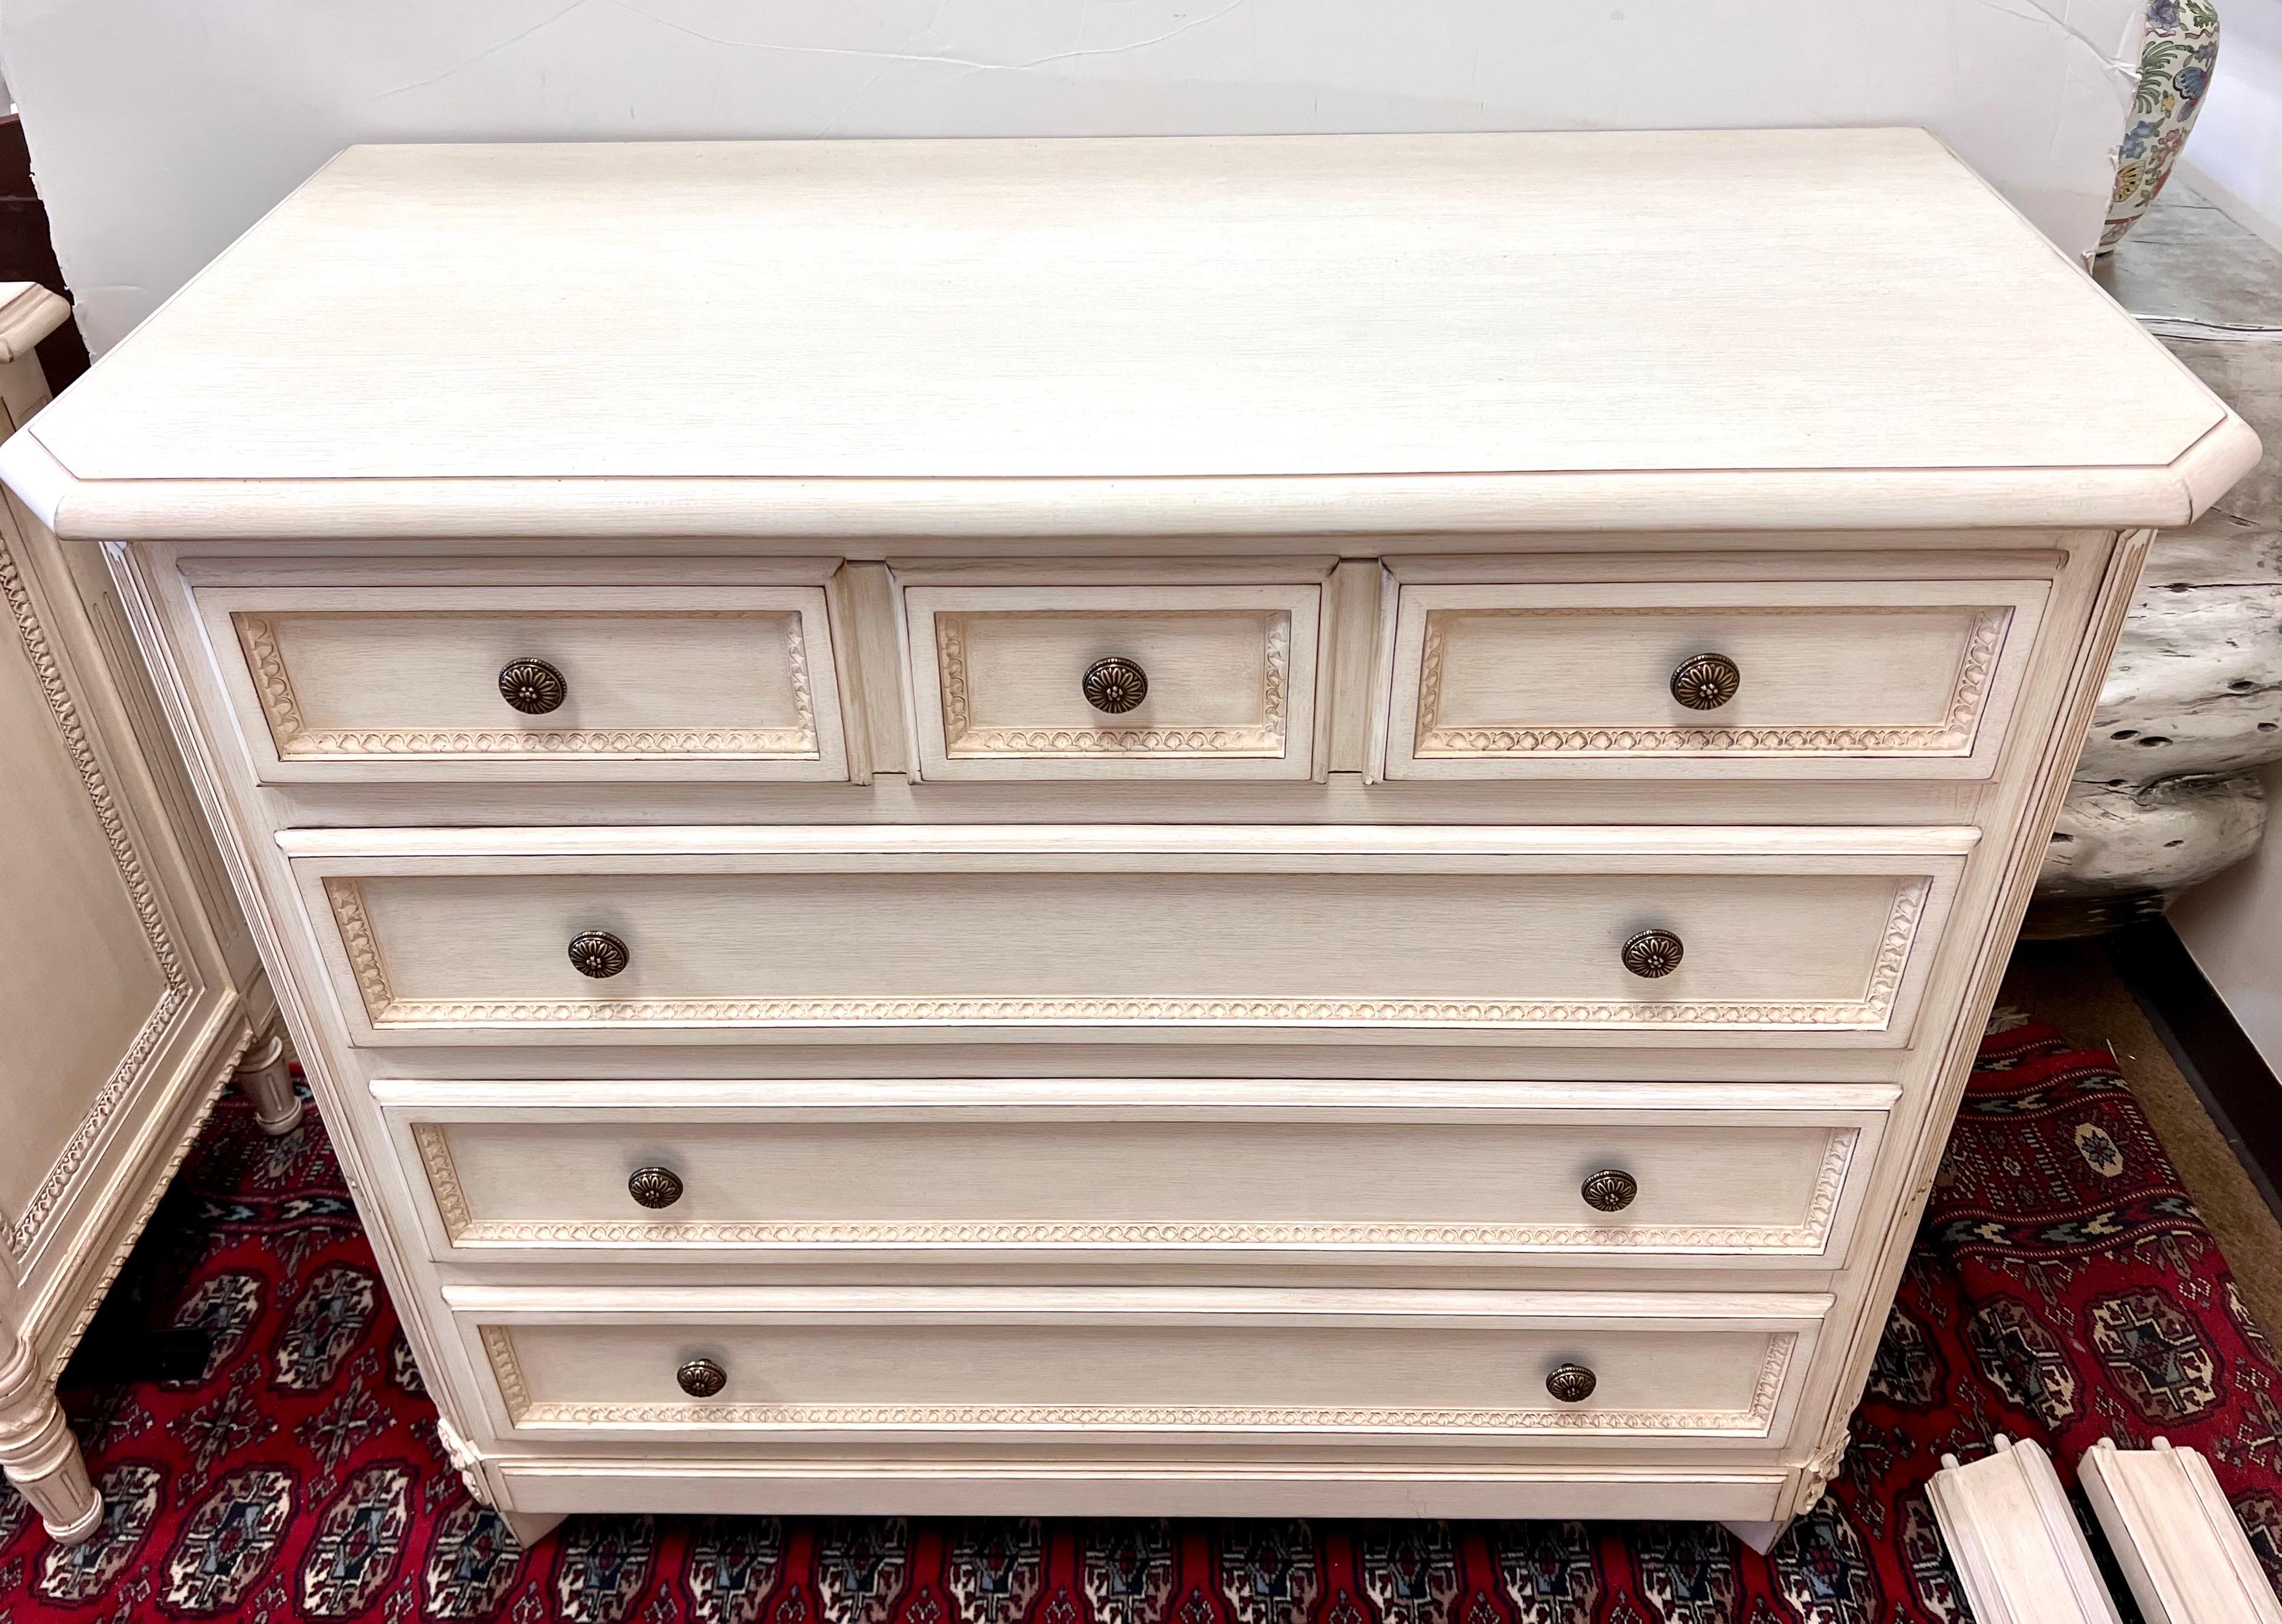 French style tall dresser by Louis J Solomon is meticulously crafted with intricate carved details and a beautiful distressed cream finish. Part of a larger set and note we are selling each piece individually. It offers functionality and